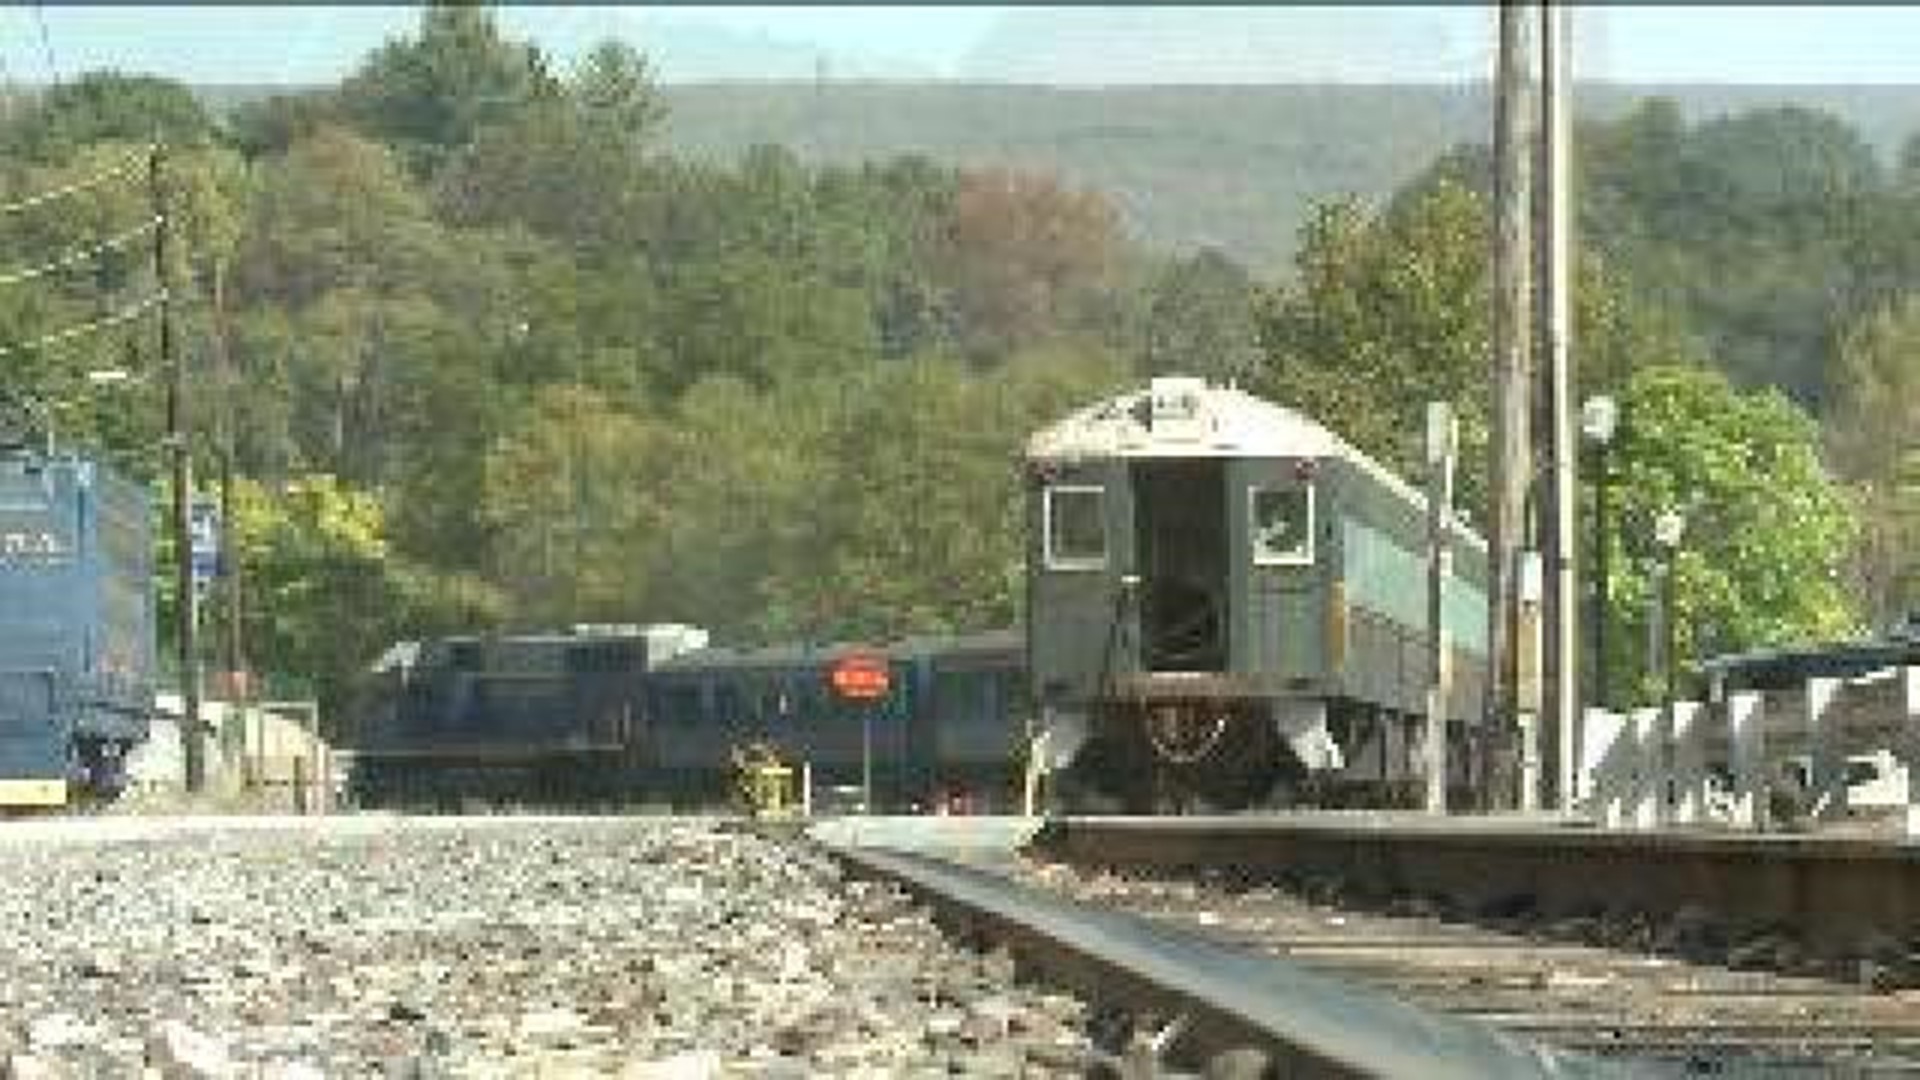 Plans Derailed for Train Riders